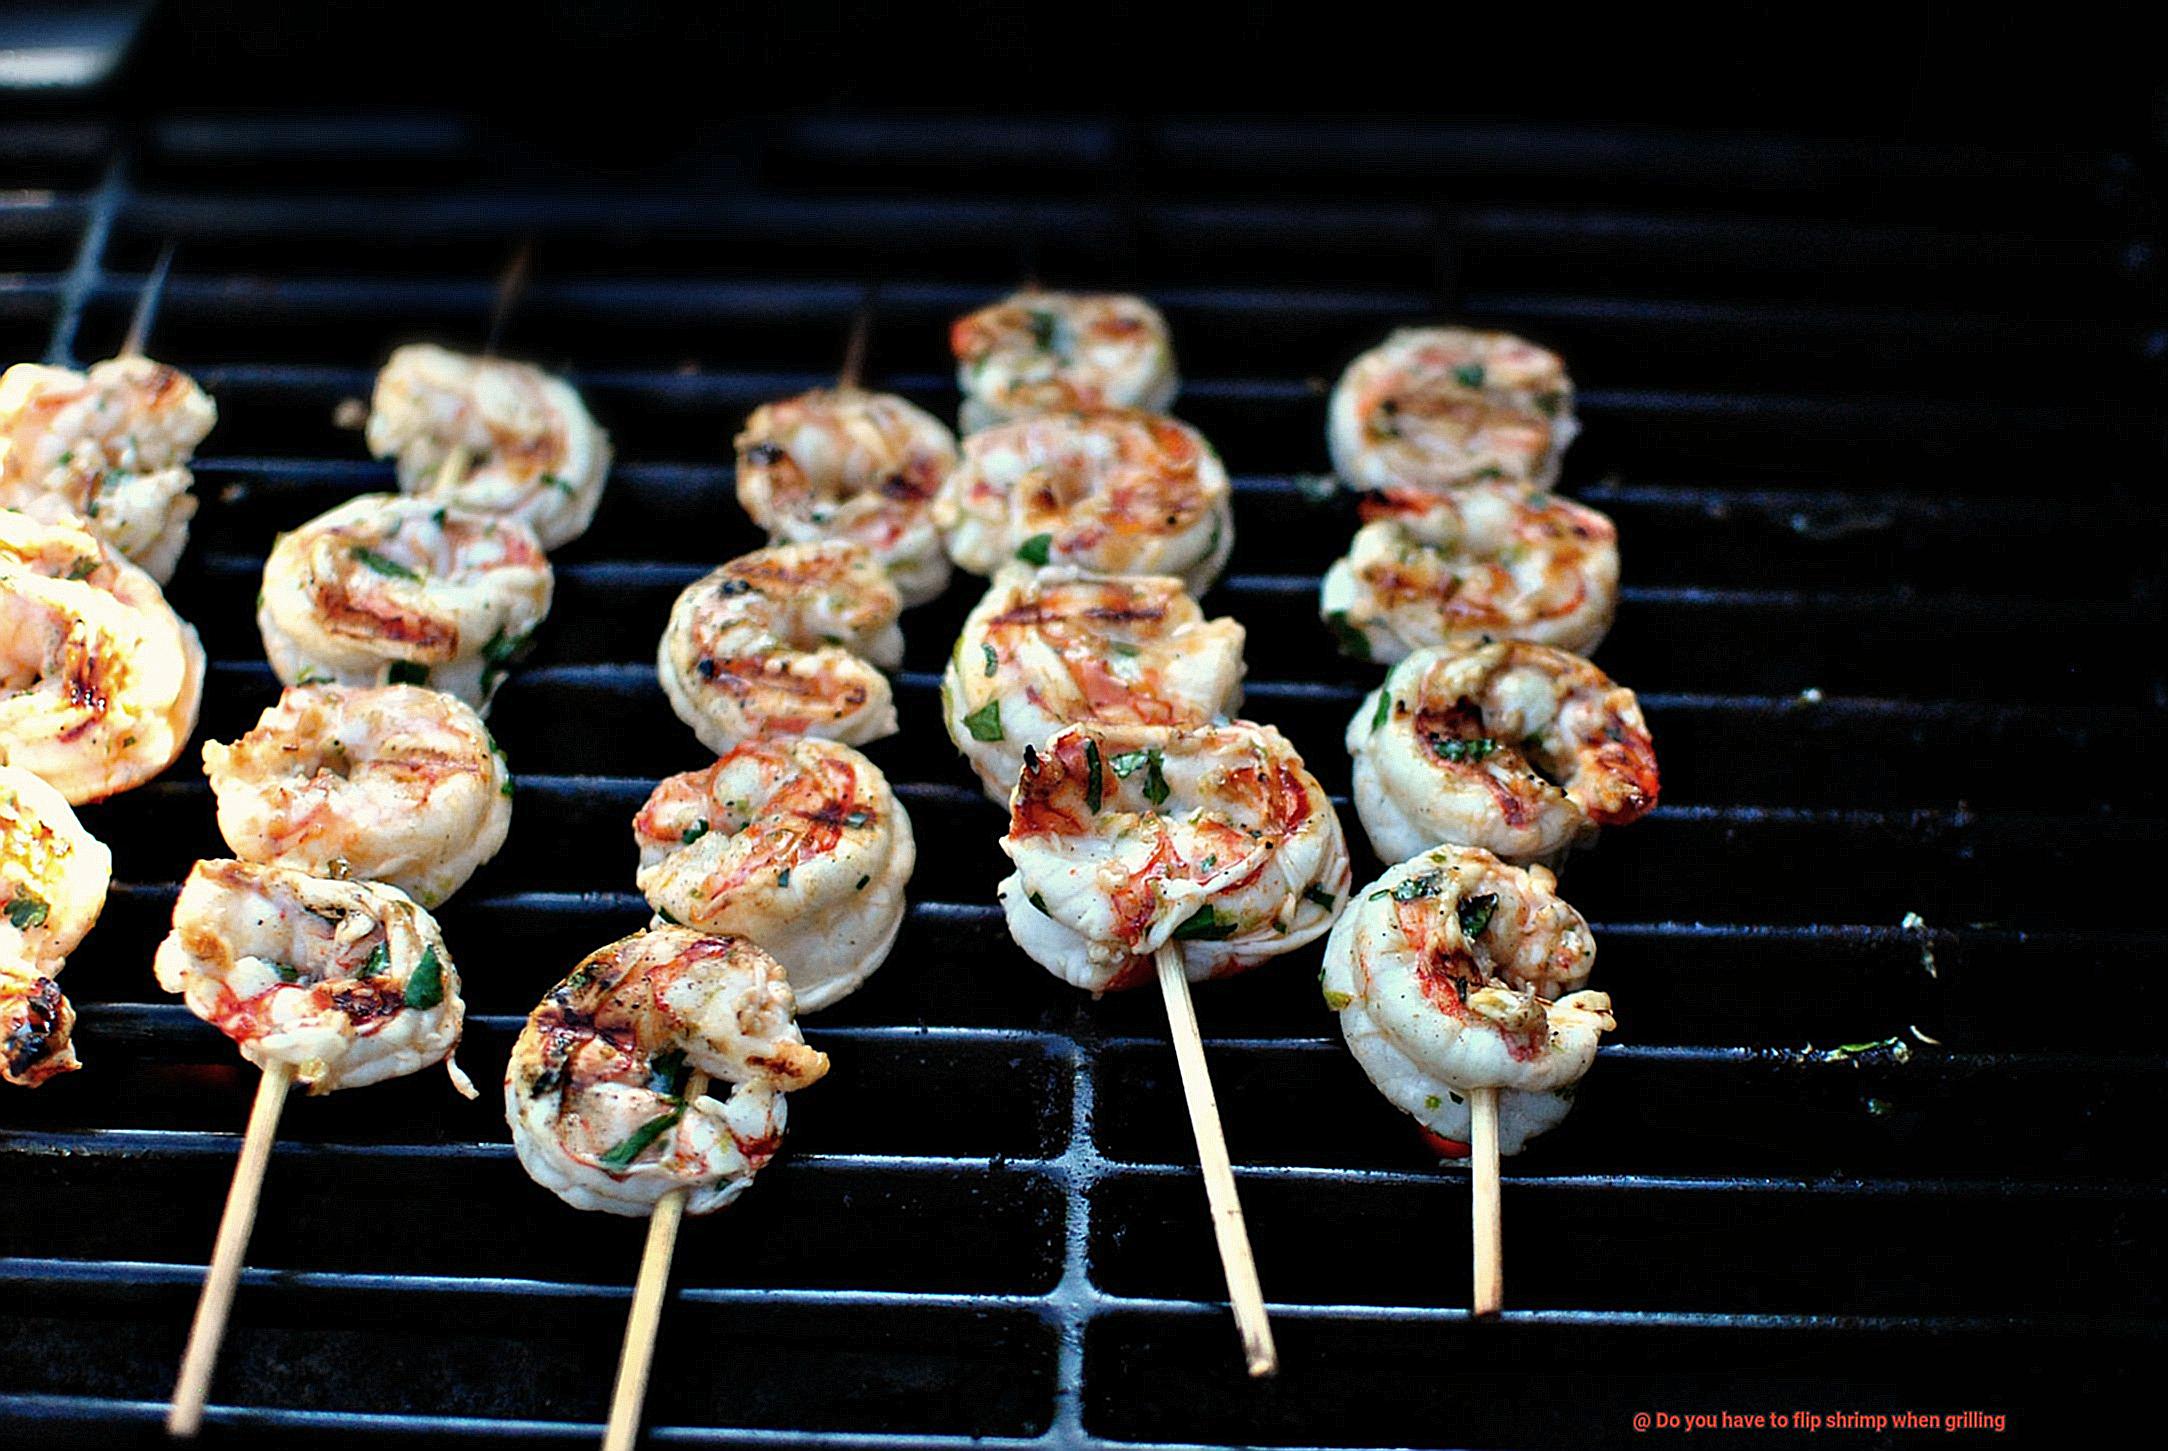 Do you have to flip shrimp when grilling-3